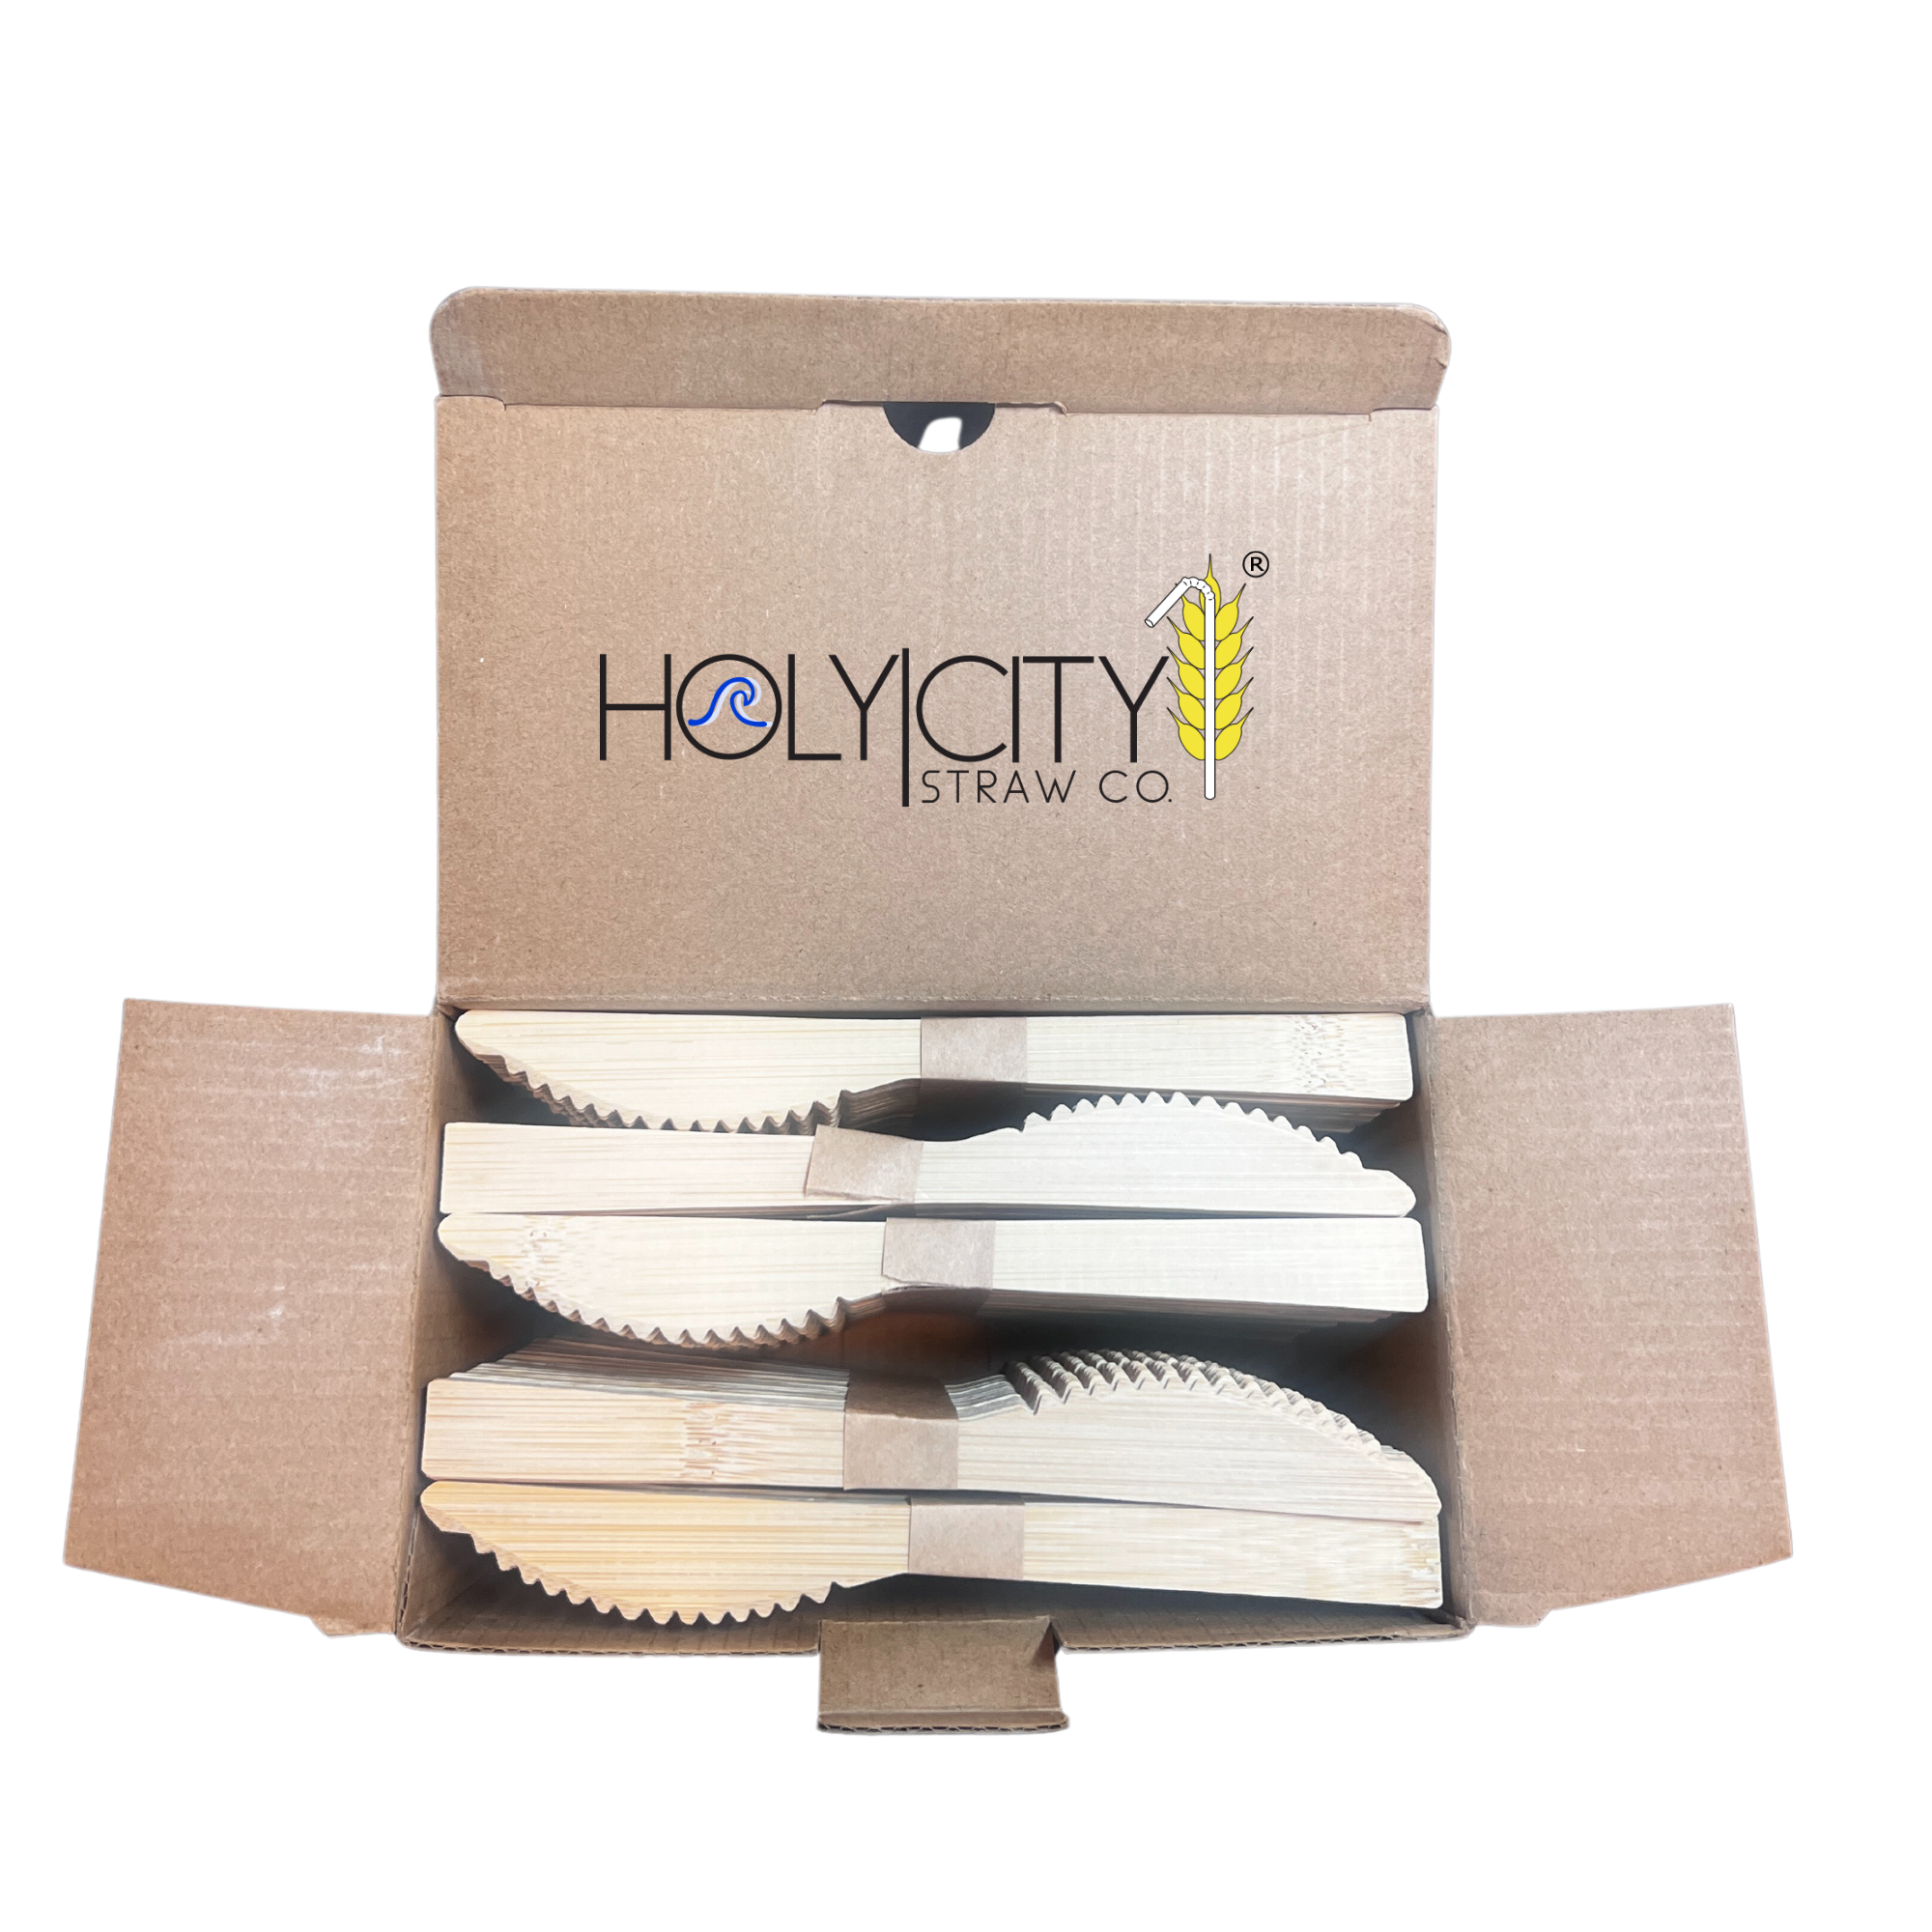 Holy City Straw-Co. 500-count open box of unwrapped knives top view